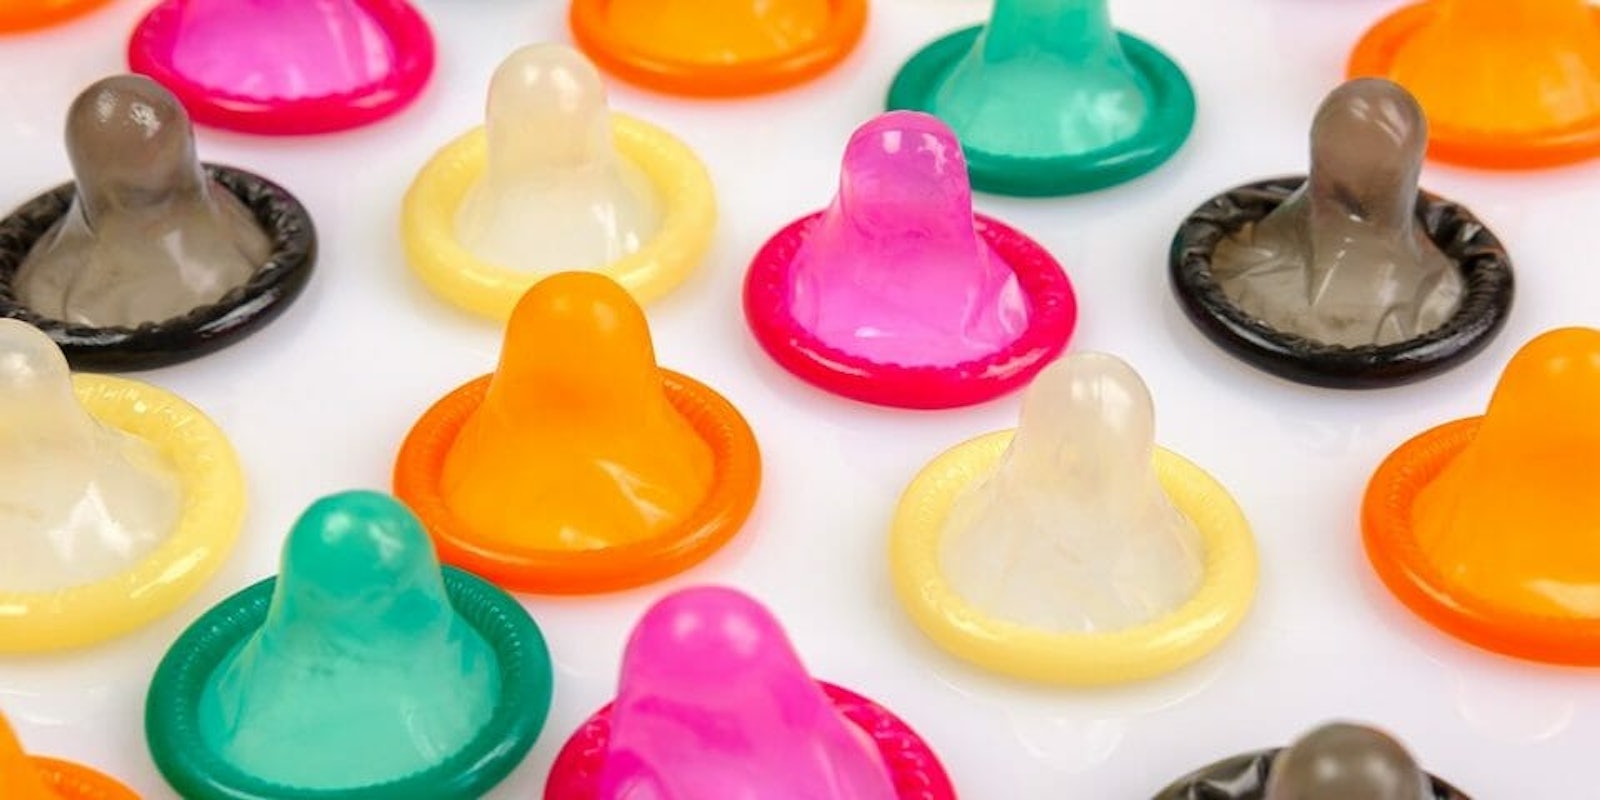 how effective are condoms